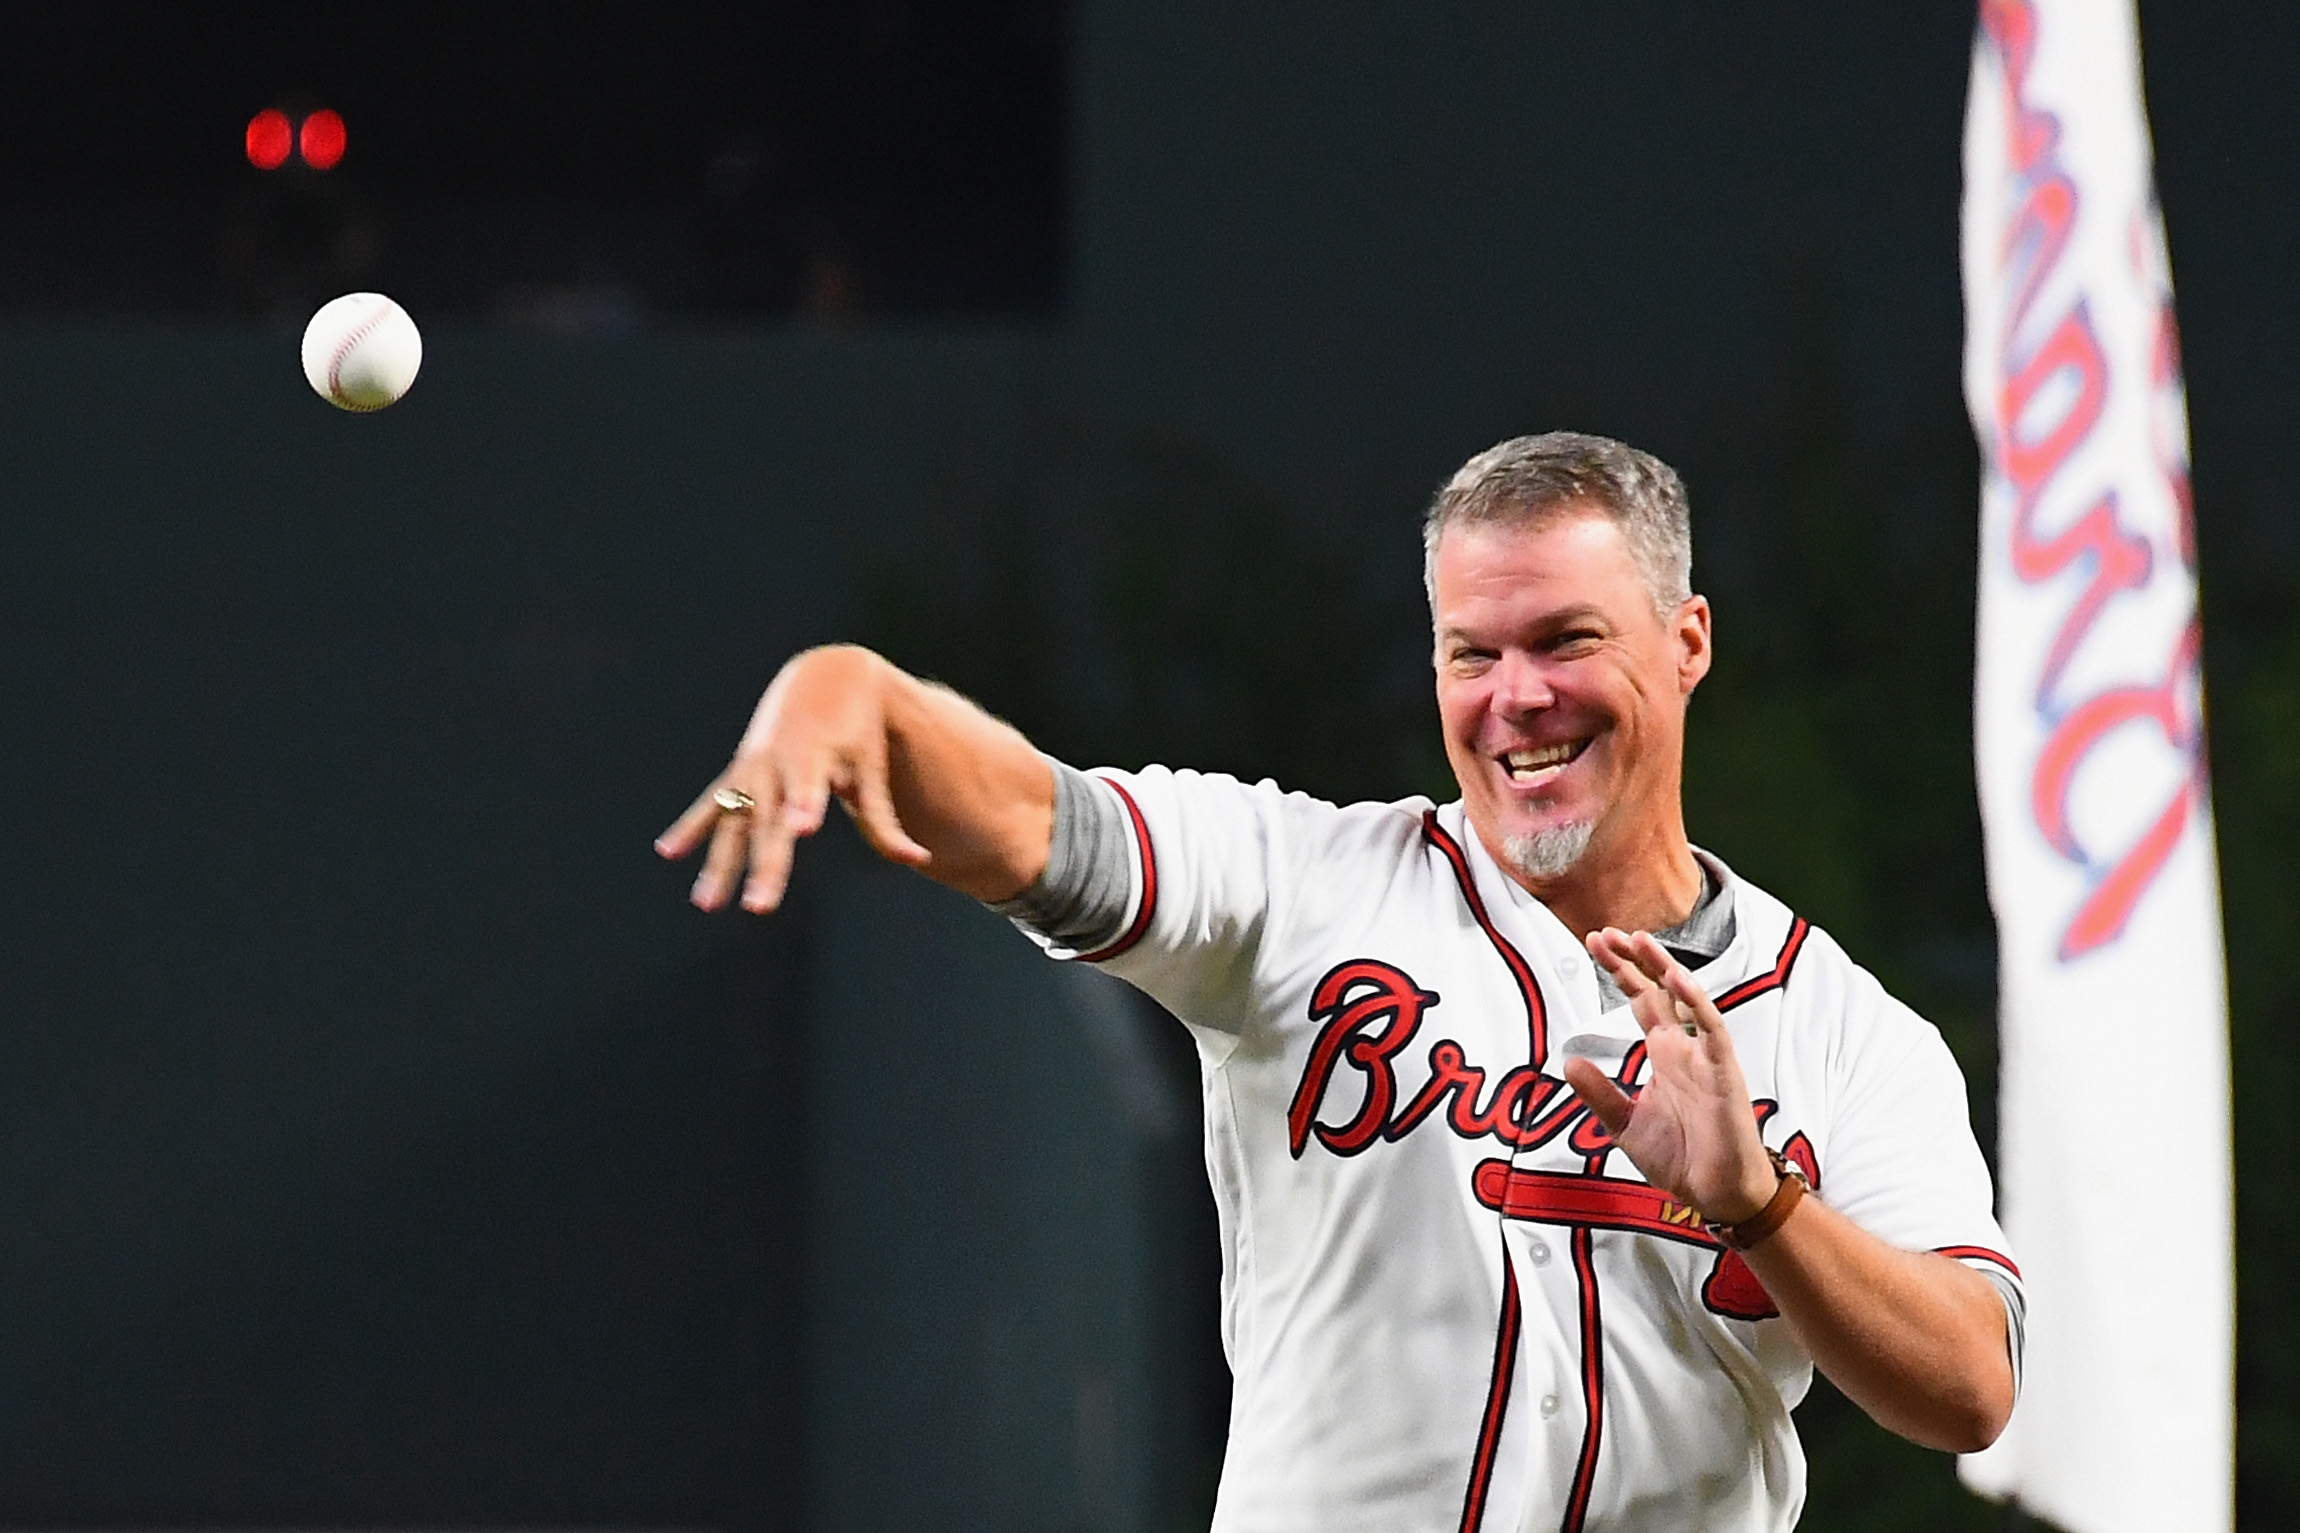 Chipper Jones throws out the fist pitch during the NLDS in 2018.